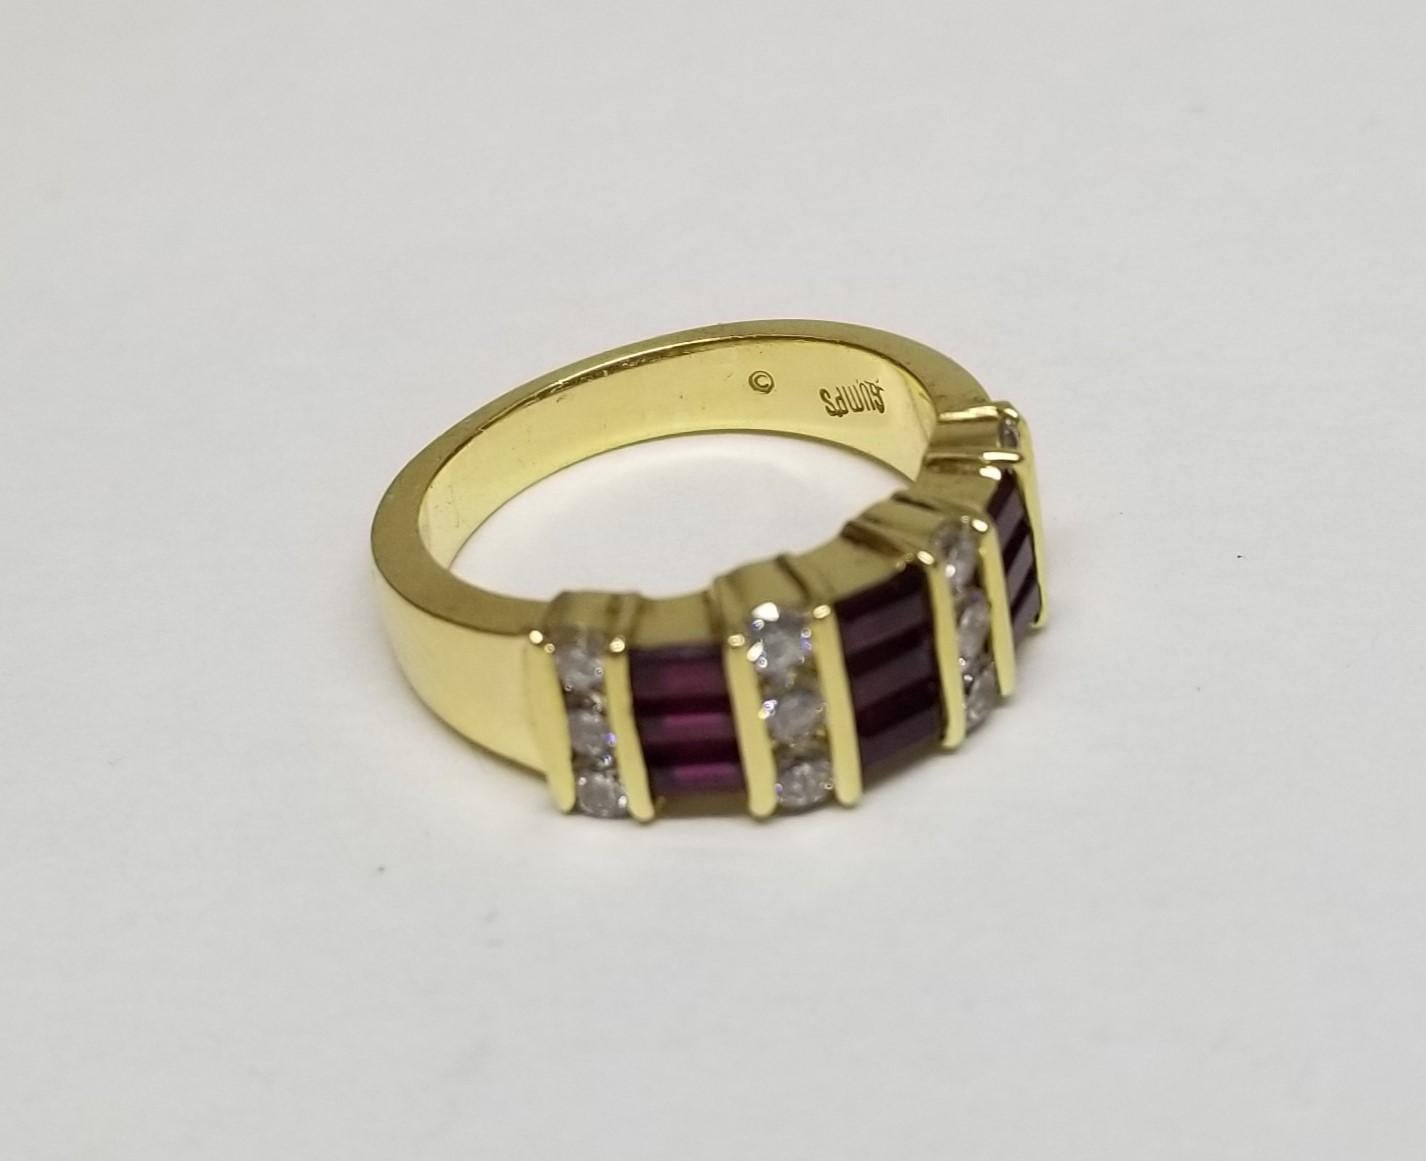 Designed by master craftsman Gumps of San Francisco presents this 18 karat yellow gold band ring beautifully  channel set alternating rows of baguette cut rubies  and    round Diamond  The ring measures 7.4 mm at the widest and tapers down to 3.5 mm